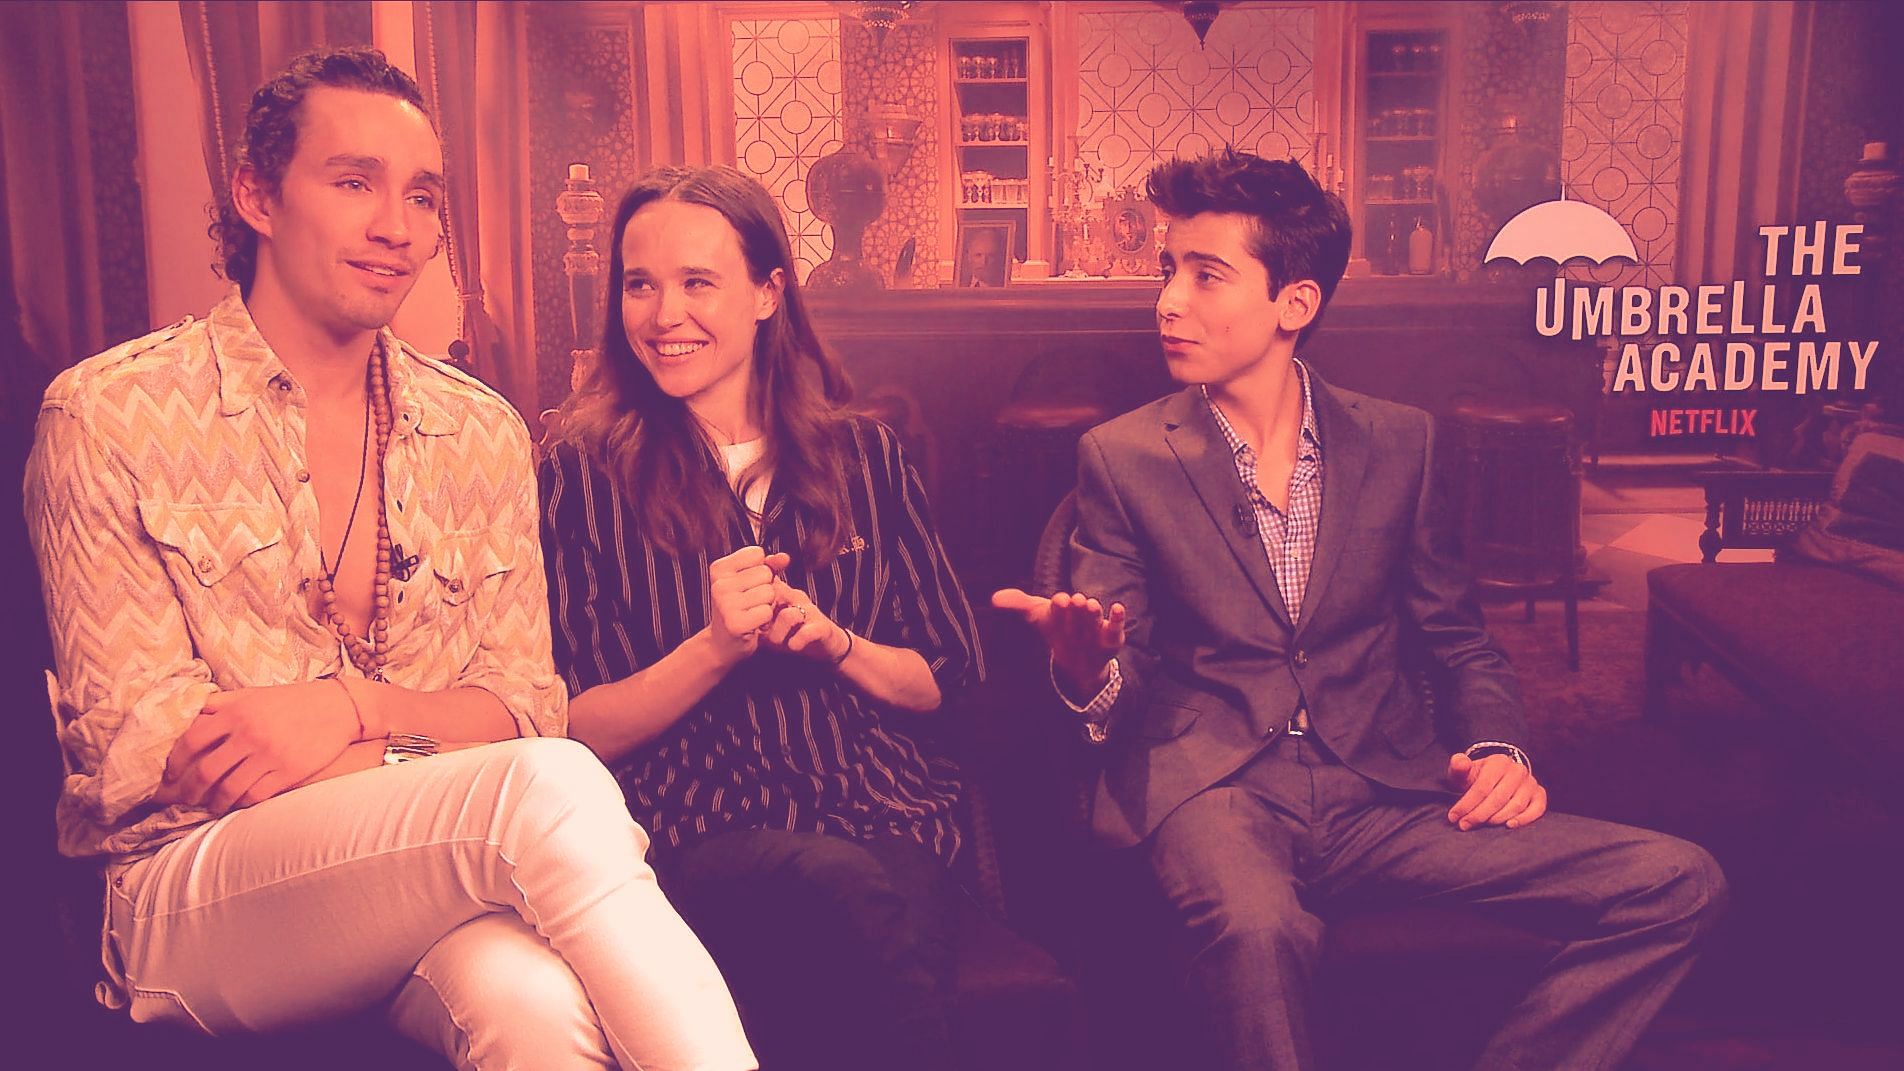 Robert Sheehan, Ellen Page and Aidan Gallagher talk about <i>The Umbrella Academy. </i>